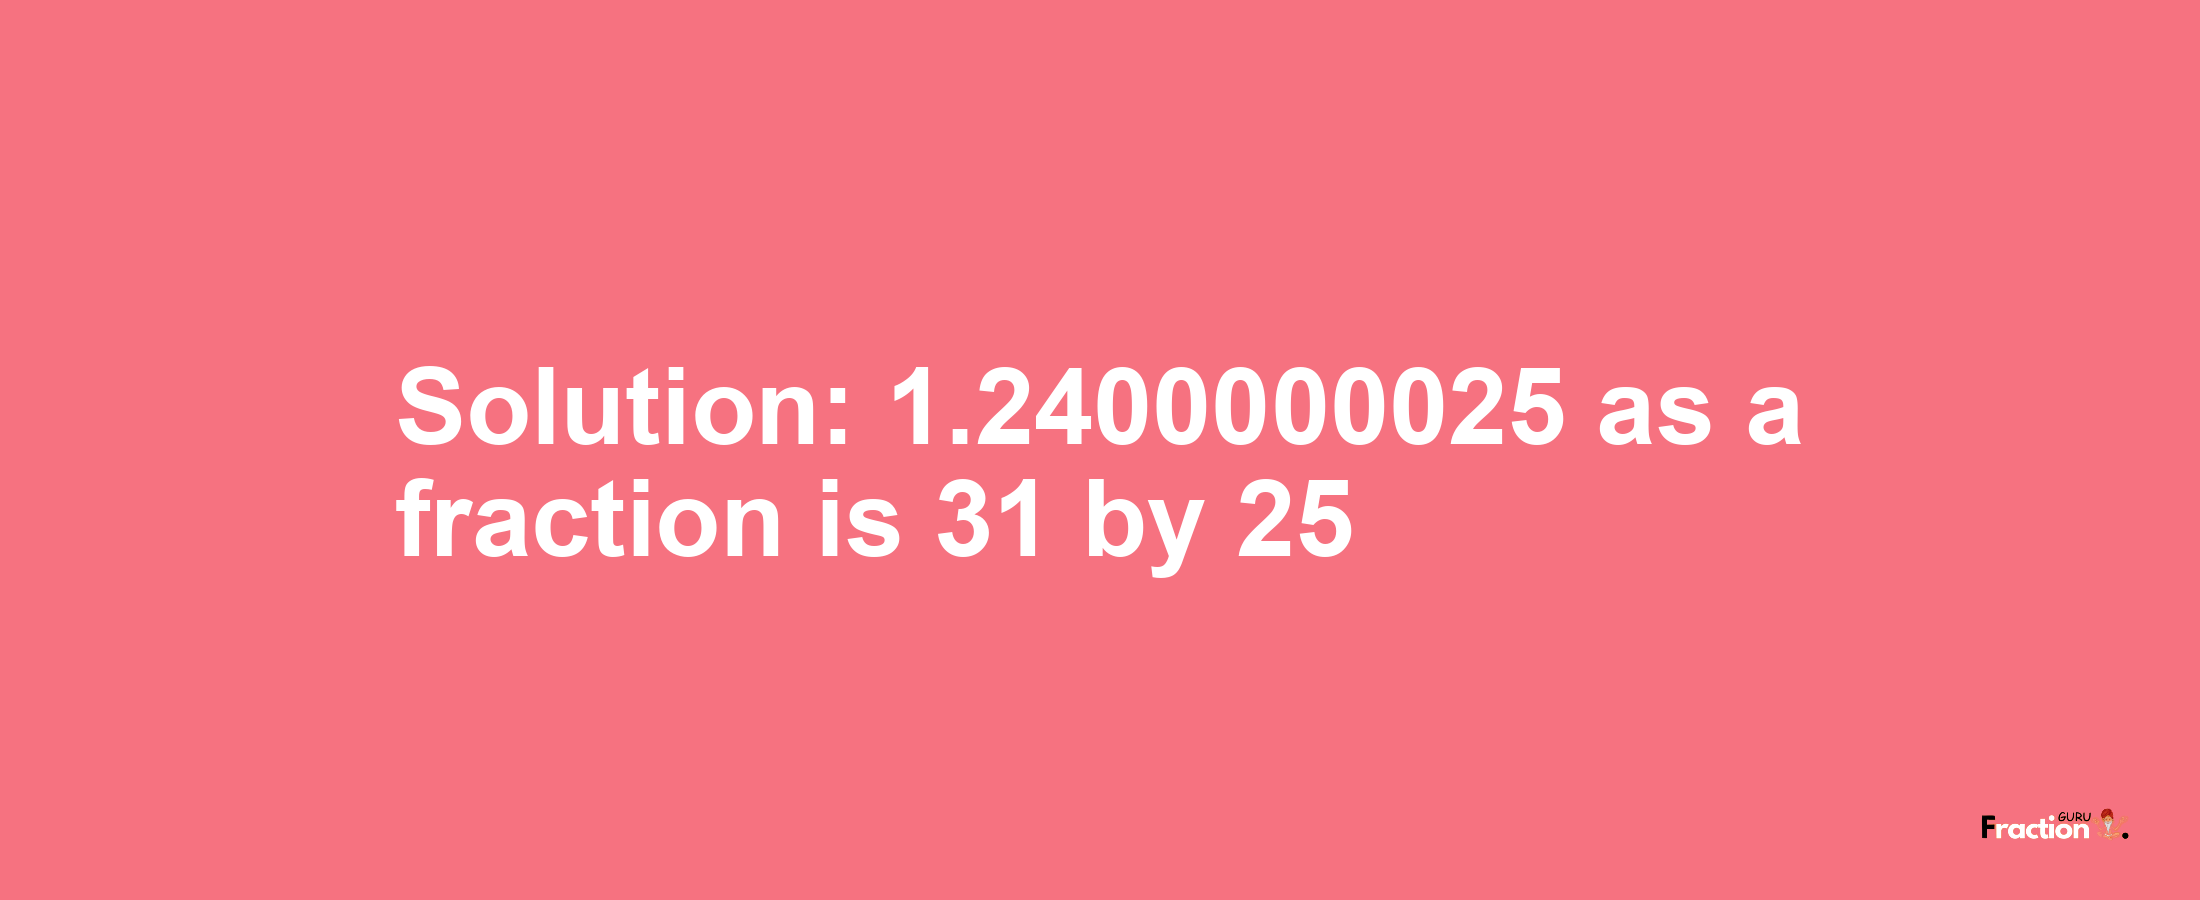 Solution:1.2400000025 as a fraction is 31/25